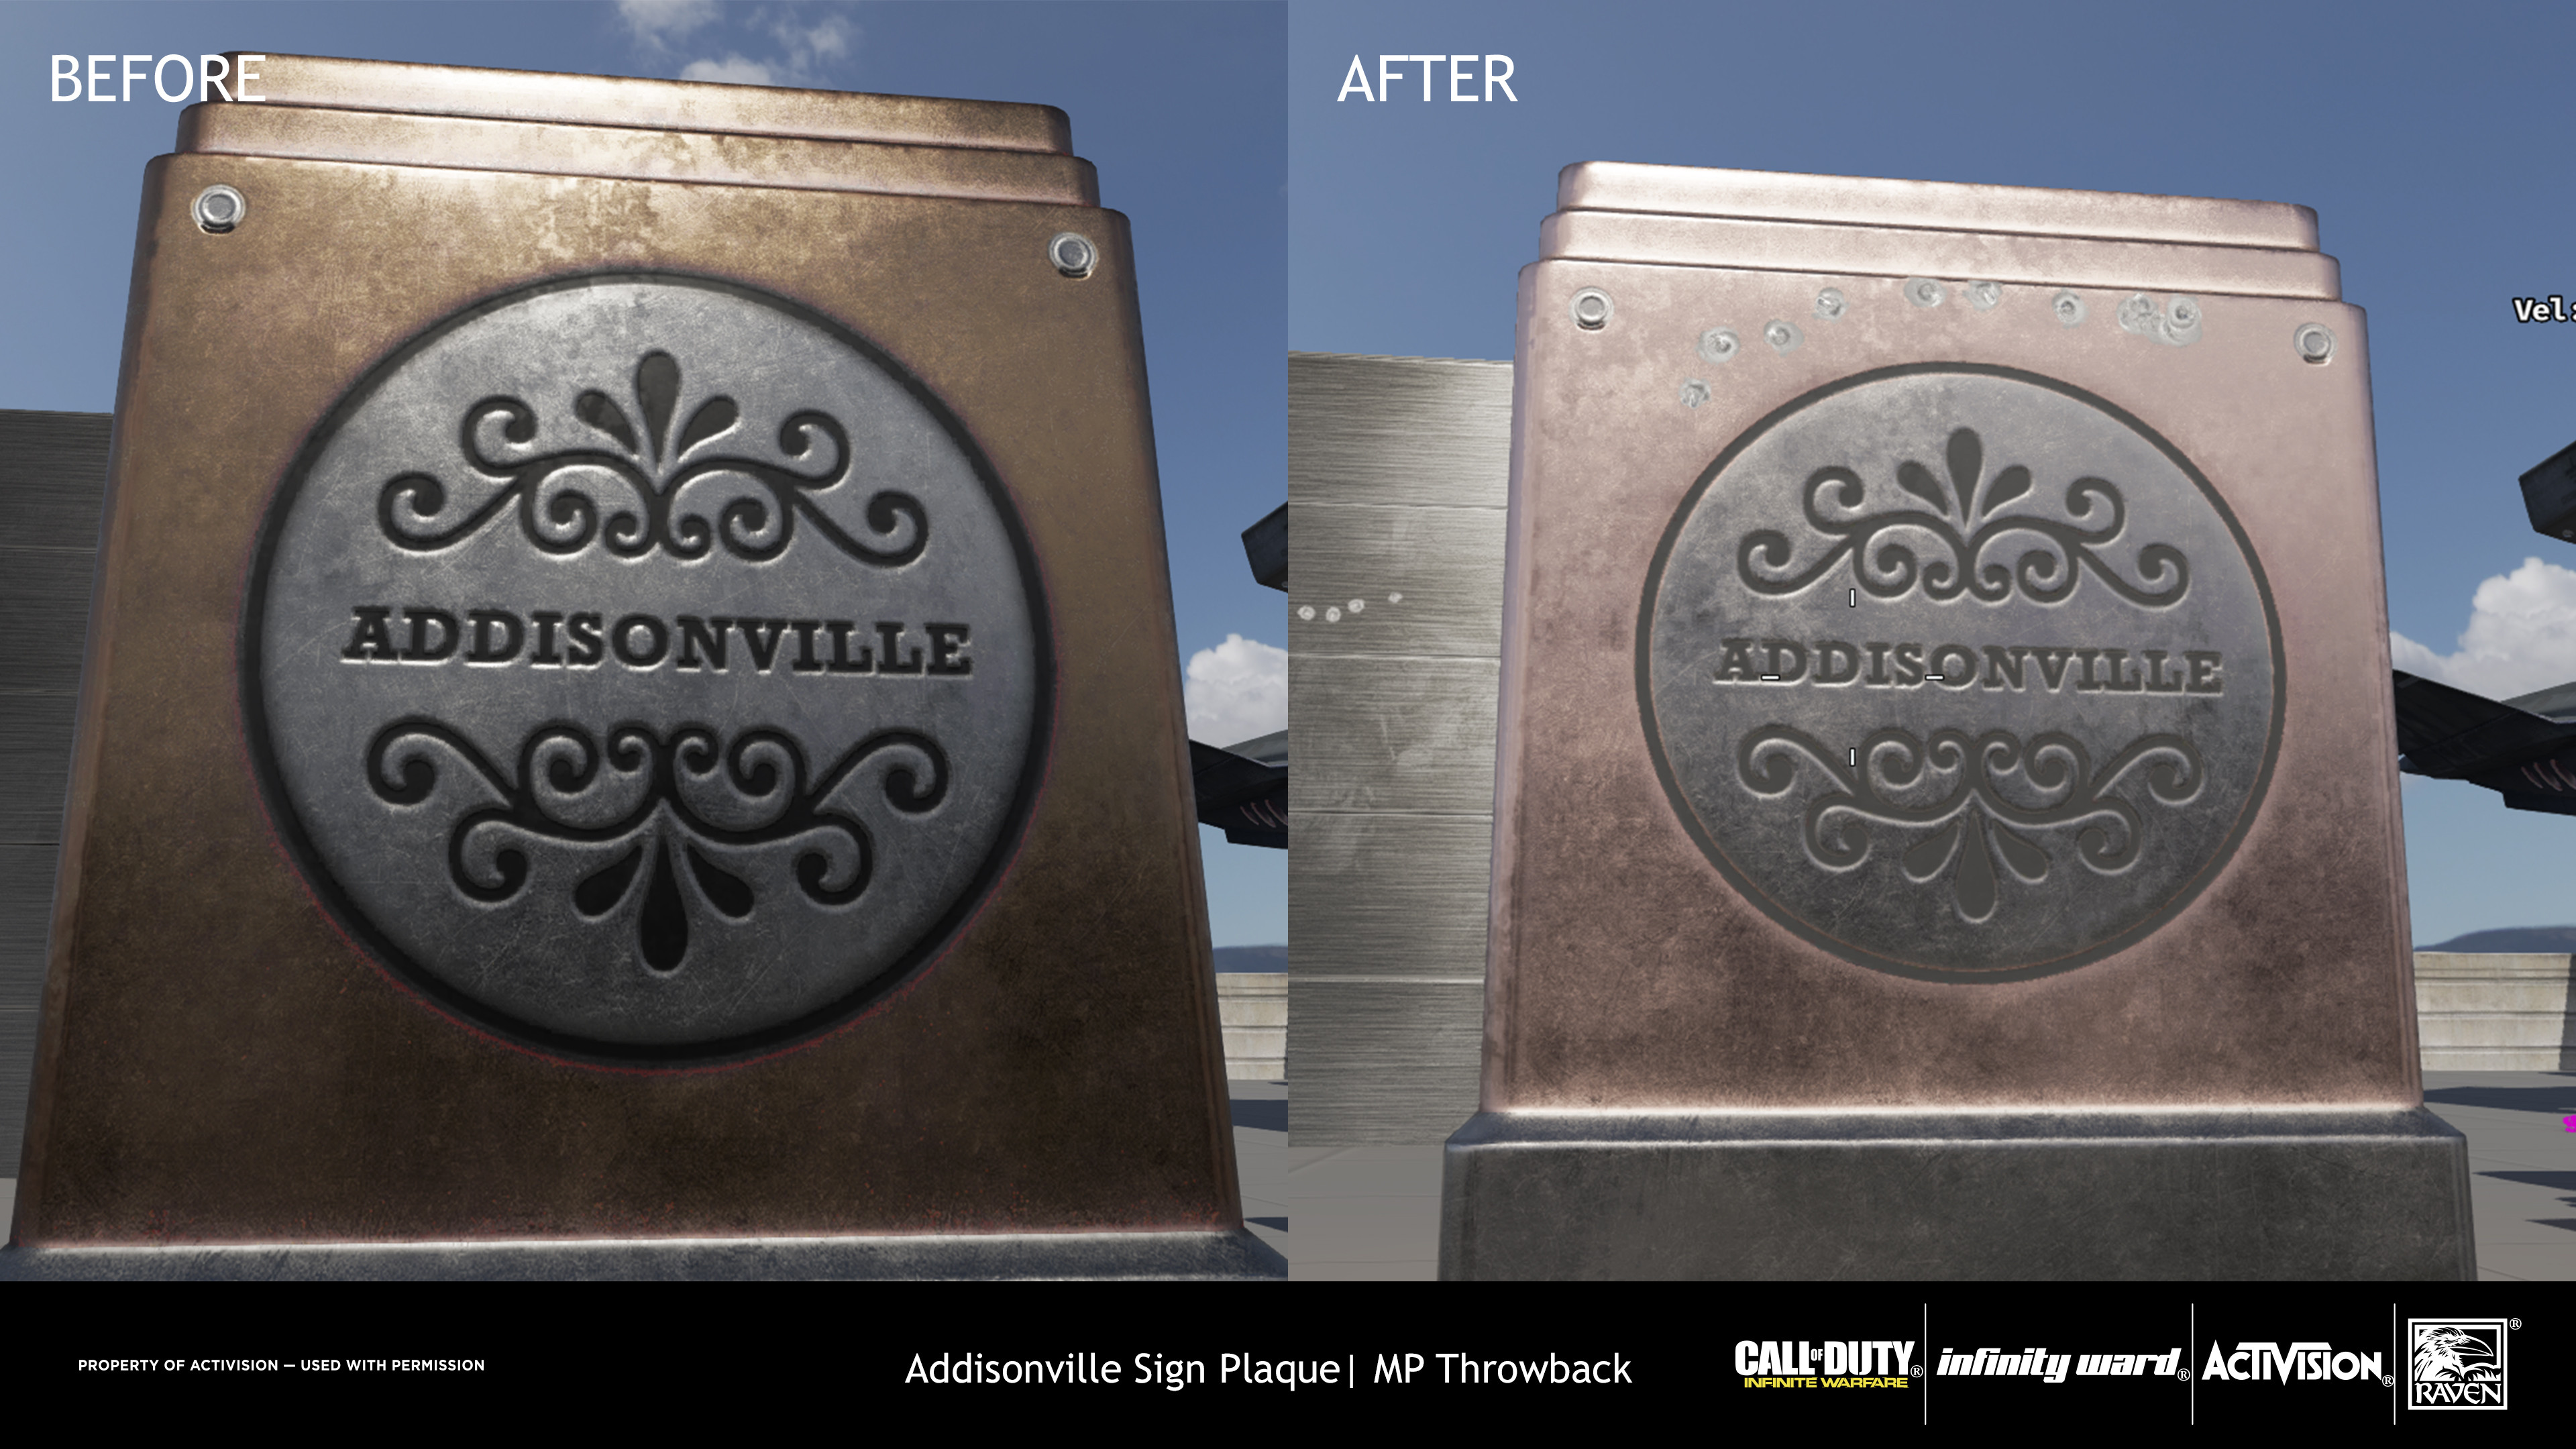 Specular values were adjusted to better match Iron metal, values for the lettering and outline were adjusted to not be dark. 